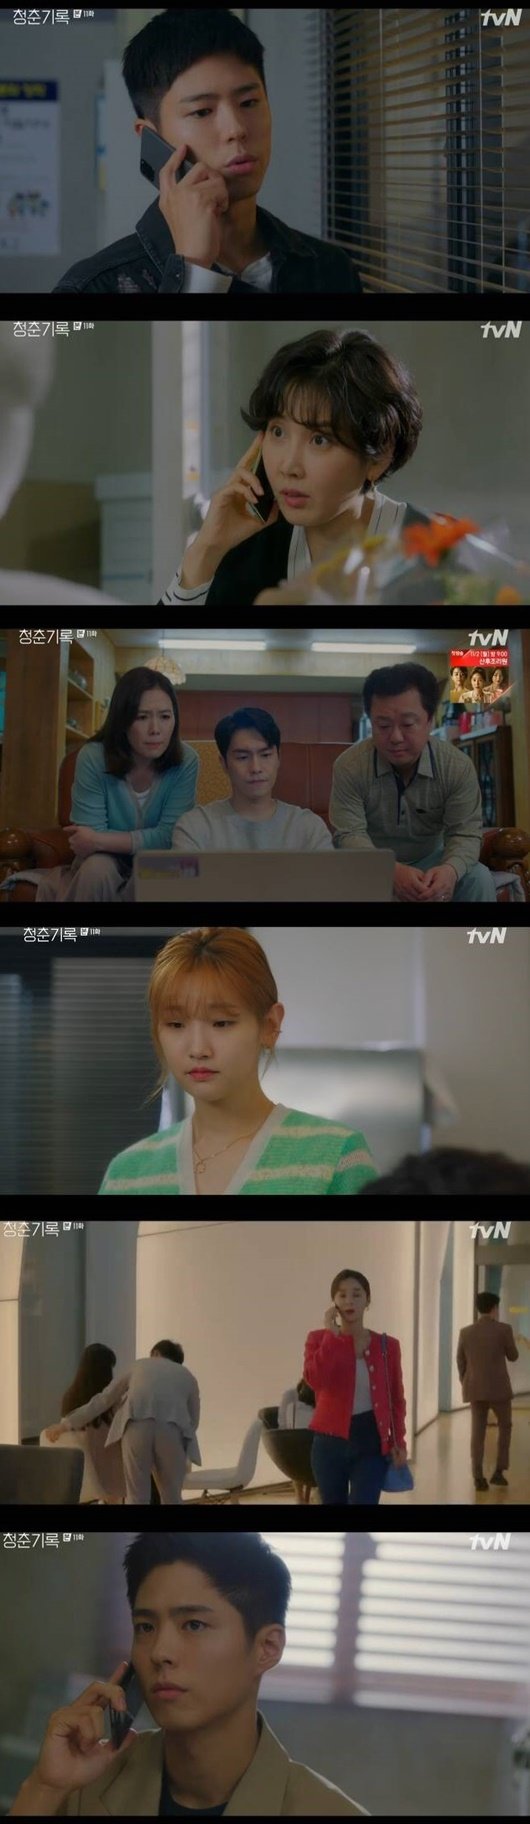 A red light has been lit up on the Record of Youth Park Bo-gum, Park So-dam loveline: Can you protect Dangers love in a continuation of situations?On the tvN monthly drama Record of Youth broadcast on the 12th, Park Bo-gum (Sa Hye-joon) was pictured under investigation by Police reference due to the death of famous designer Lee Seung-jun (Charlie Jung).Manager Shin Dong-mi (Lee Min-jae), who was told late on that Park Bo-gum was being investigated by Police, was outraged.I had to be careful about my behavior in a situation where rumors were constant, but Park Bo-gum could act like Li Dian and cause controversy.Moreover, Lee Seung-jun and Li Dian had been constantly involved in the rumor that they were sensitive.What I was worried about became a reality.Bae Yunkyoung (Kim Soo-man) appeared on an entertainment information program and spread the controversy by referring to rumors of Park Bo-gum and Lee Seung-jun that were heard through Lee Chang-hoon (Lee Tae-soo).The image of Park Bo-gum was being distorted differently from the facts.Shin Dong-mi had to find a way to do this, and for this, he foresaw a hard-line policy for the evil spirits.Still, I wondered if Park Bo-gum and Park So-dam (Stability Ha) would be revealed. But Park Bo-gum opposed it.Because I knew better than anyone that Park So-dams daily life was getting harder when I was tied to myself.But Danger came from an unexpected place.Seol In-ah (Jung Ji-ah) met with Bae Yunkyoung with the introduction of Byun Woo-suk (Won Hae-hyo) and interviewed him under the title Park Bo-gums ex-girlfriend.Park So-dam, not Park So-dam, is on the front, and Park Bo-gum and Park So-dams love line has become more Danger.The belief that it was solid was much weaker than love, Park So-dams narration was included in the trailer, suggesting a change in the love front of the two.